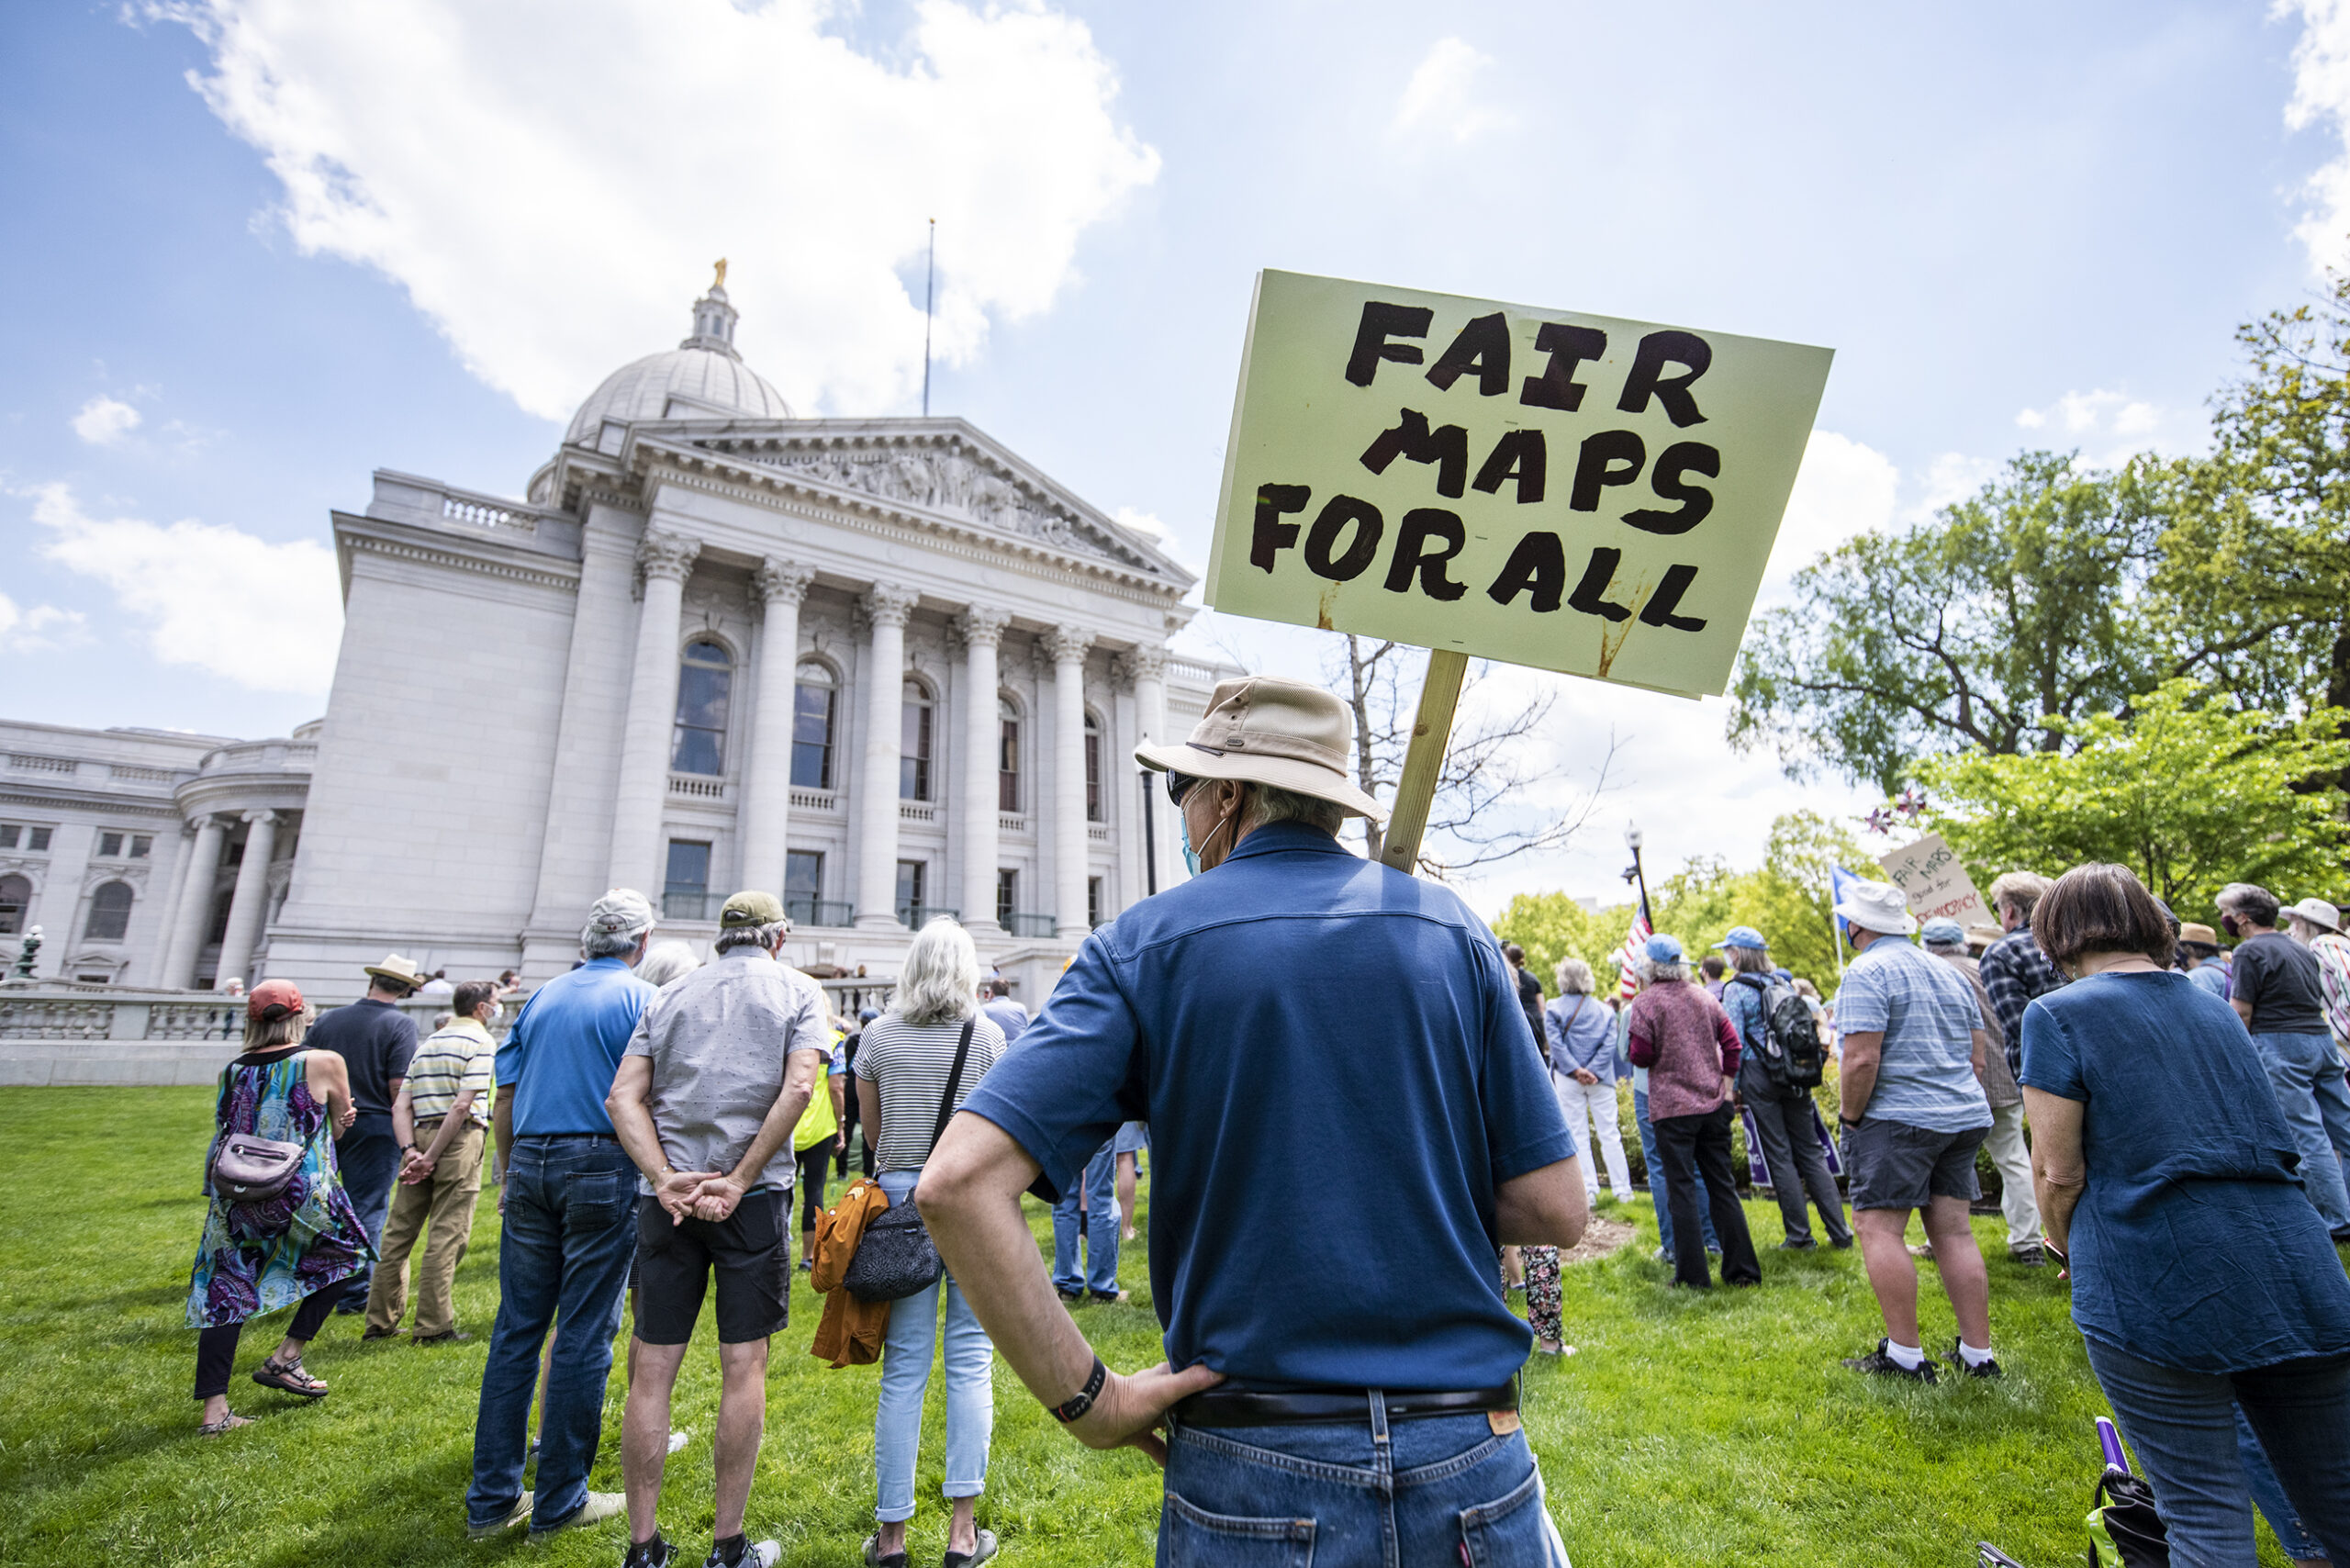 People stand outside the Wisconsin State Capitol on a sunny day. A man holds a sign that says "FAIR MAPS FOR ALL."